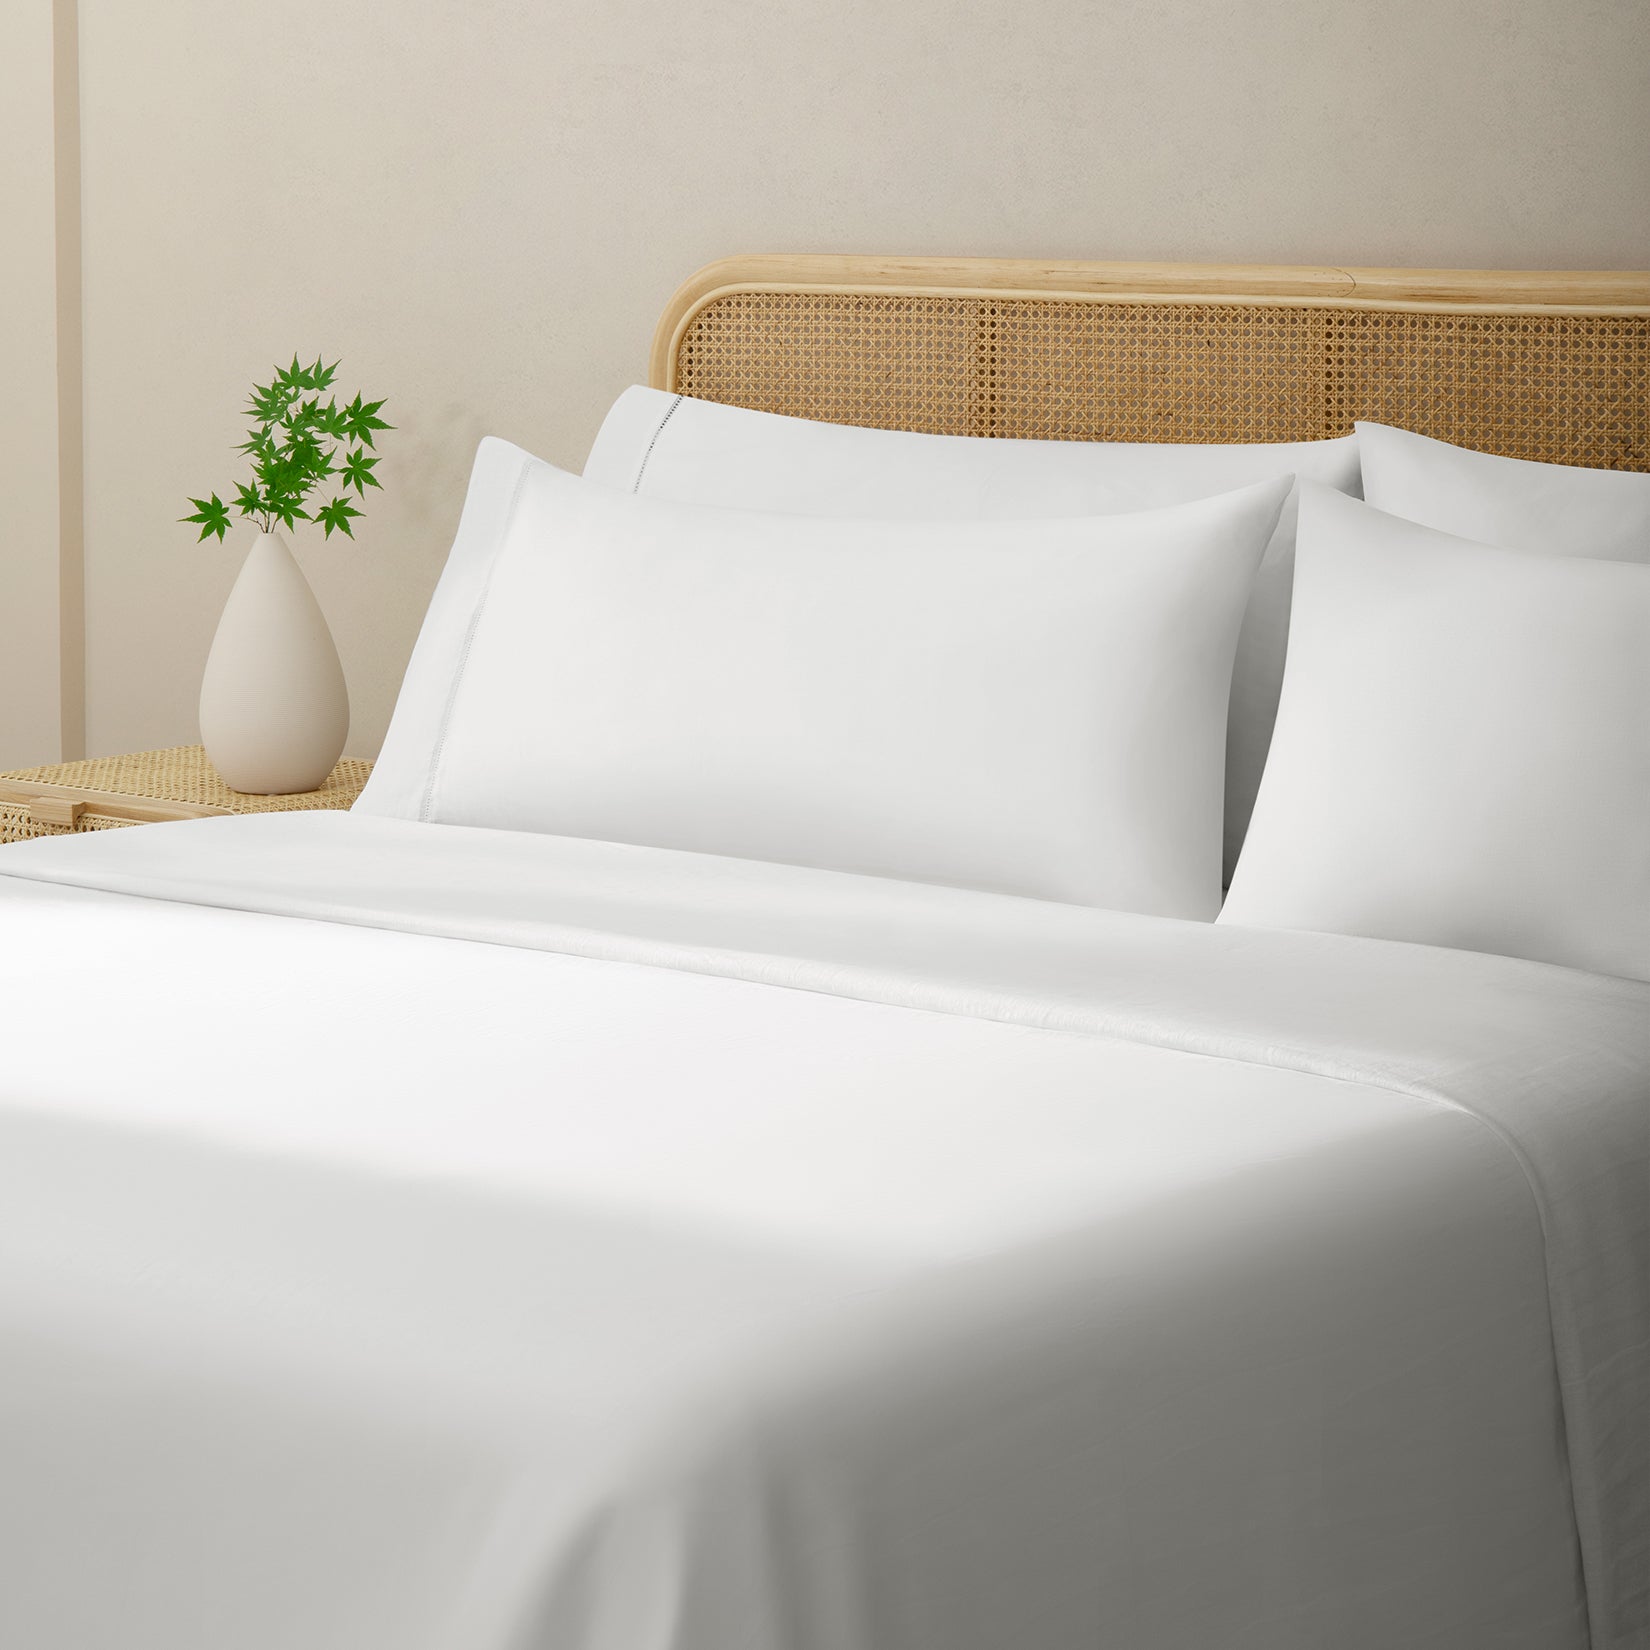 Olivia soft white linen sheet set. Soft white linen pillows and soft white duvet on bed with plant on side table from side angle.